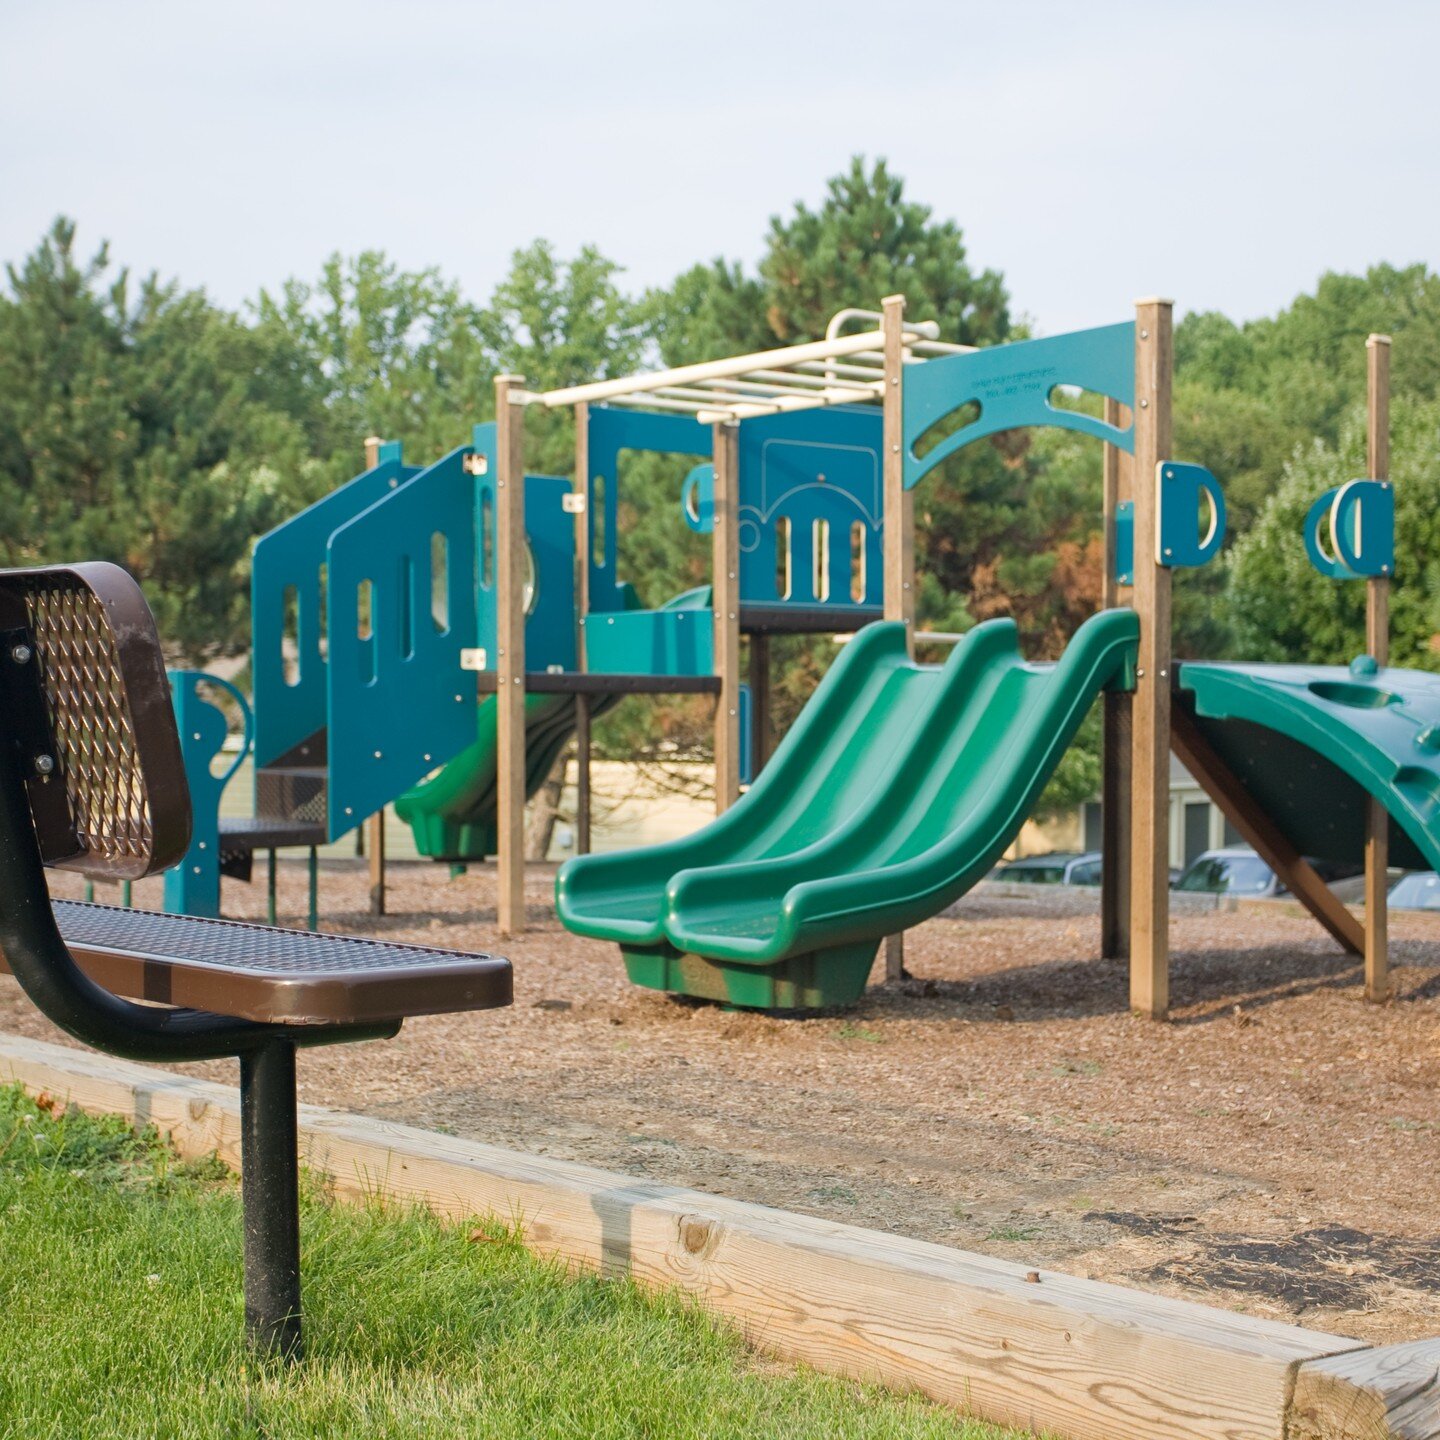 Tag, you're it! Lucky to have our playground as one of our fun amenities! 😍

#playground #communityliving #westchesterpa #chestercountypa #chestercountyrealestate #windermere #pennsylvaniawoods